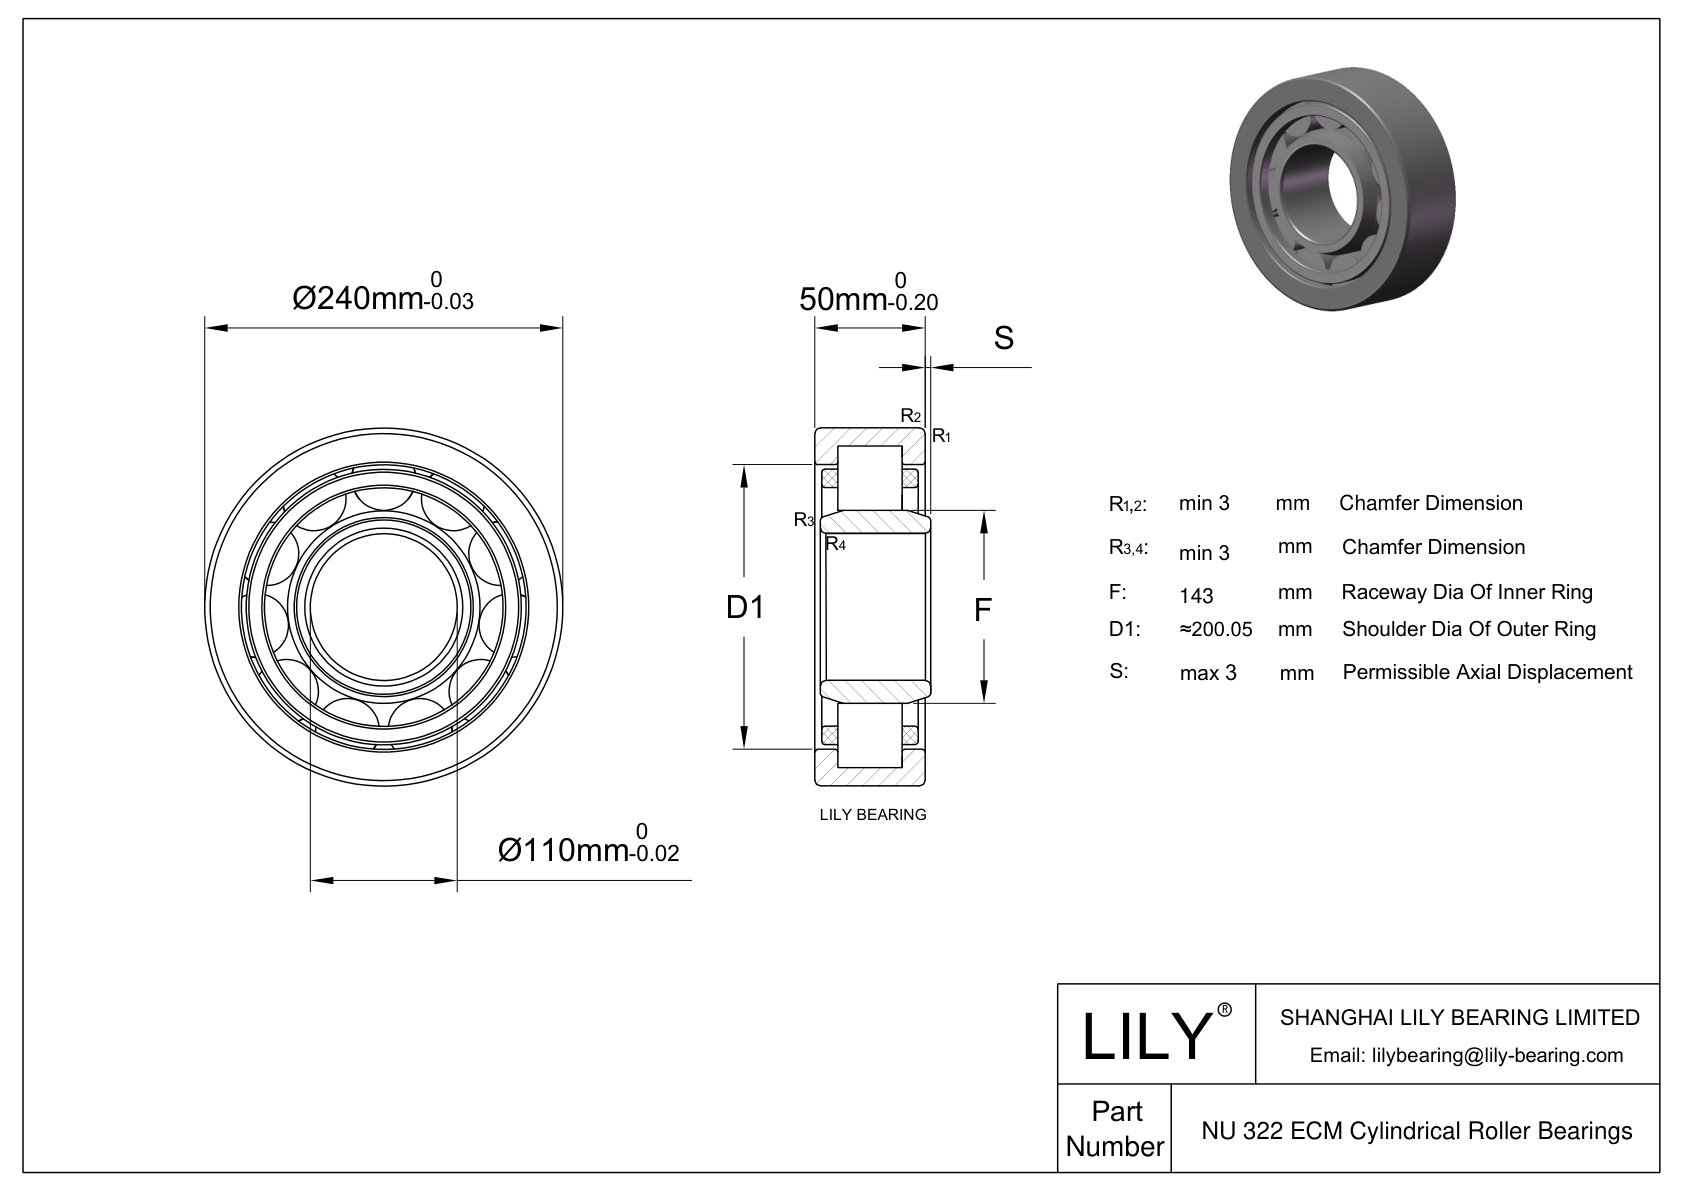 NU 322 ECM/C3VL0241 Ceramic Coated Cylindrical Roller Bearings cad drawing